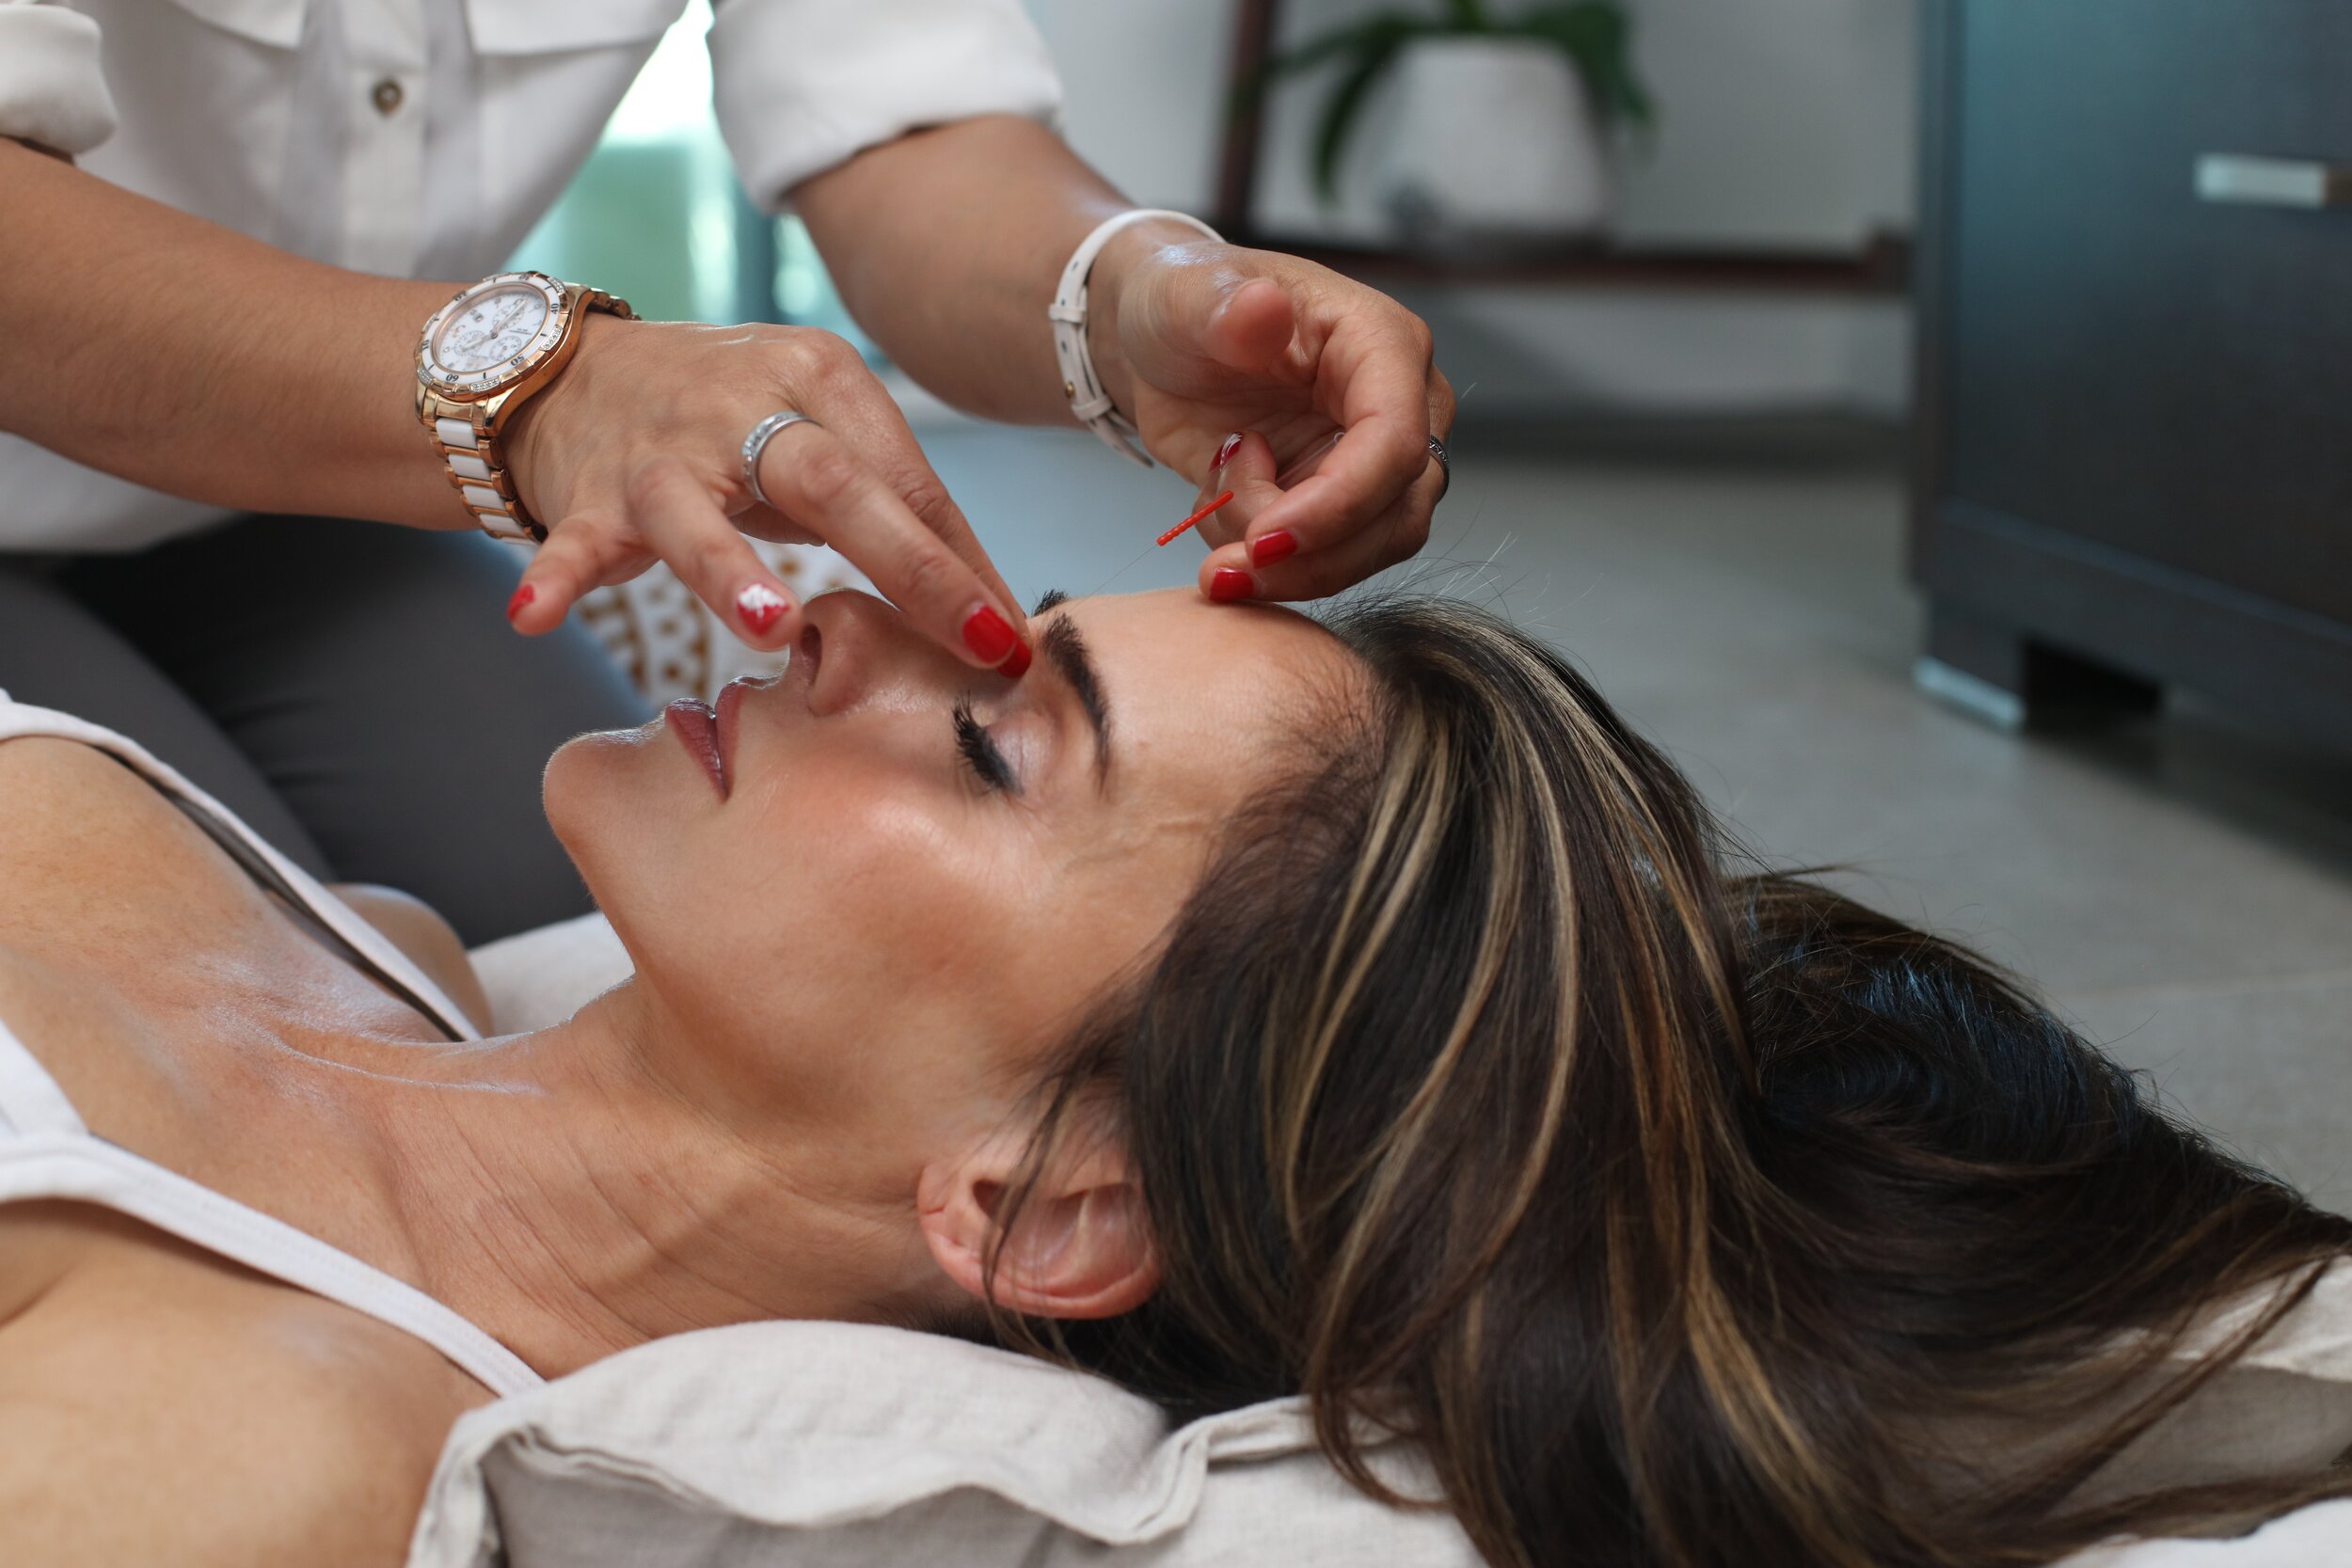 Botox for the First Time? Here's What to Expect